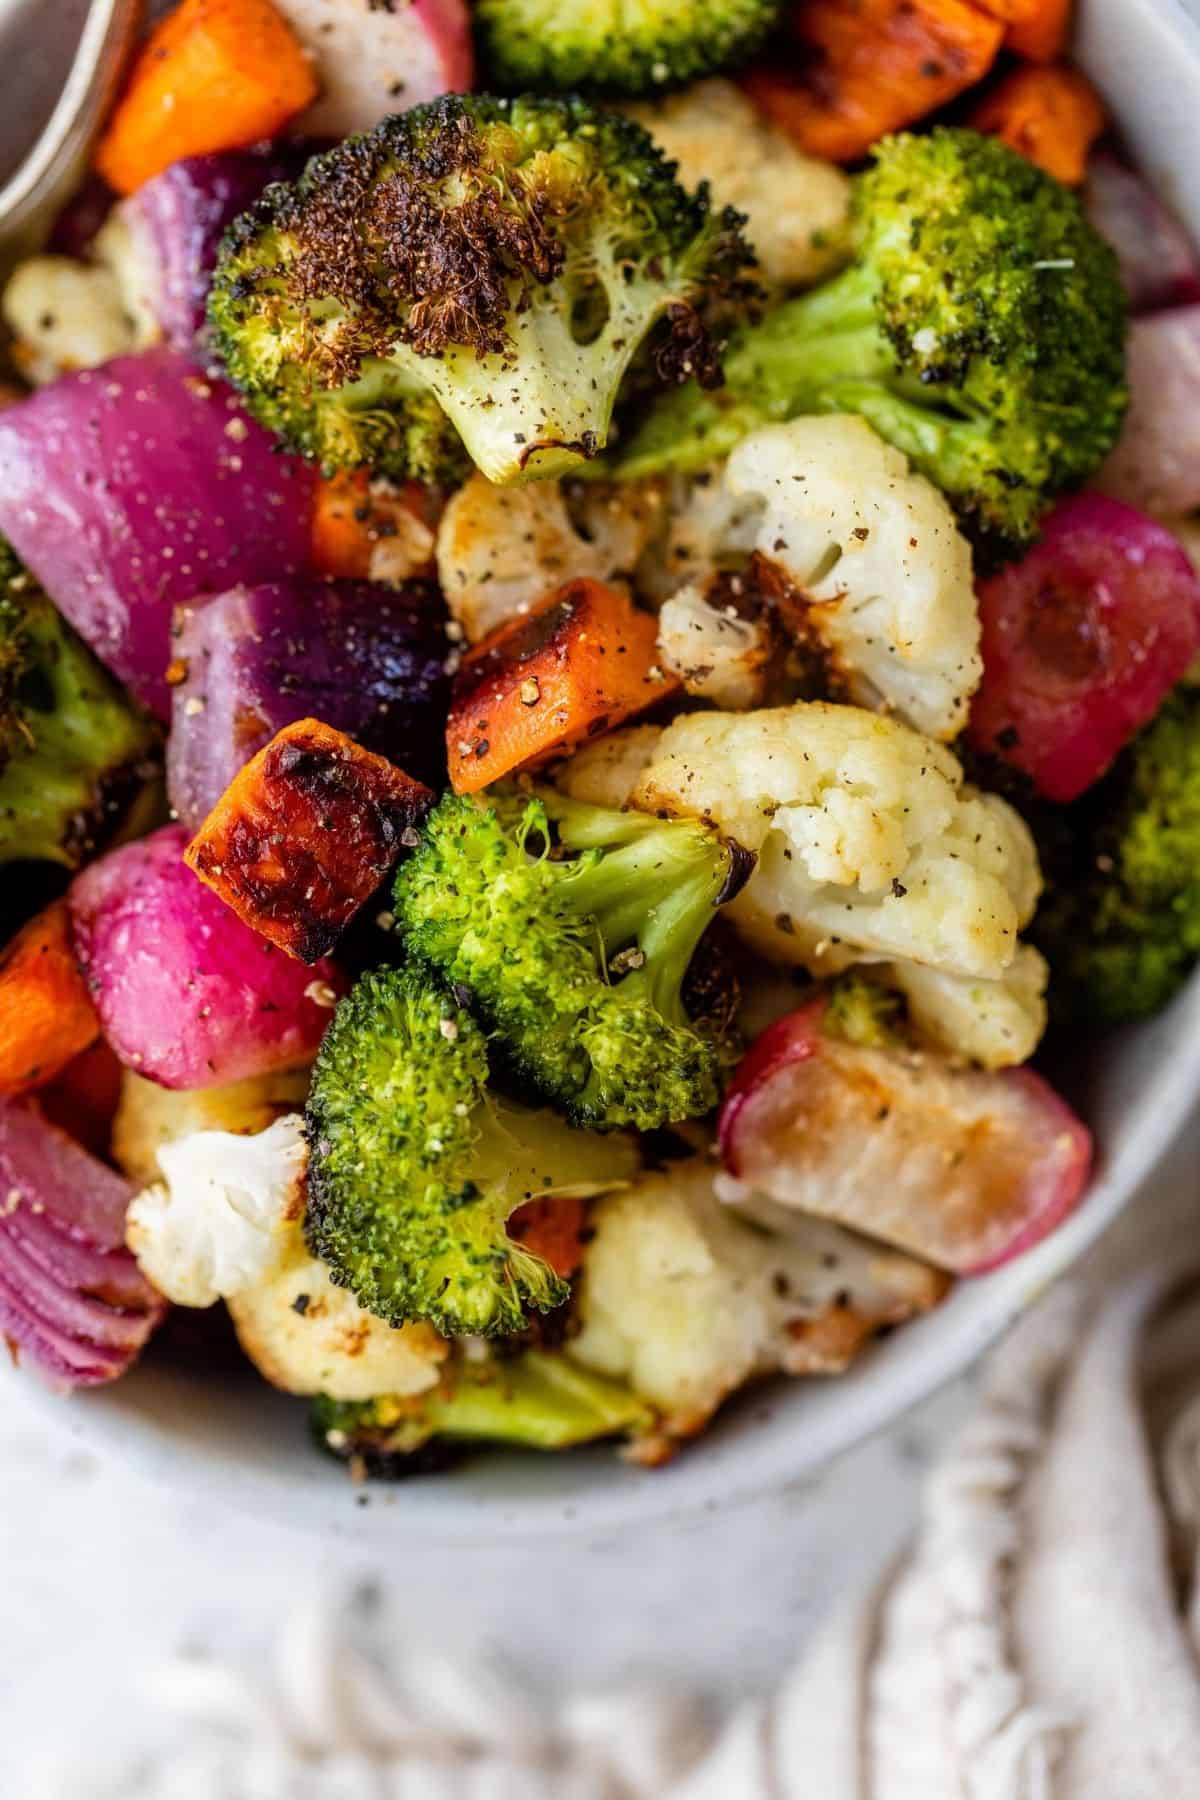 roasted broccoli, cauliflower, radishes and carrots in a white serving bowl